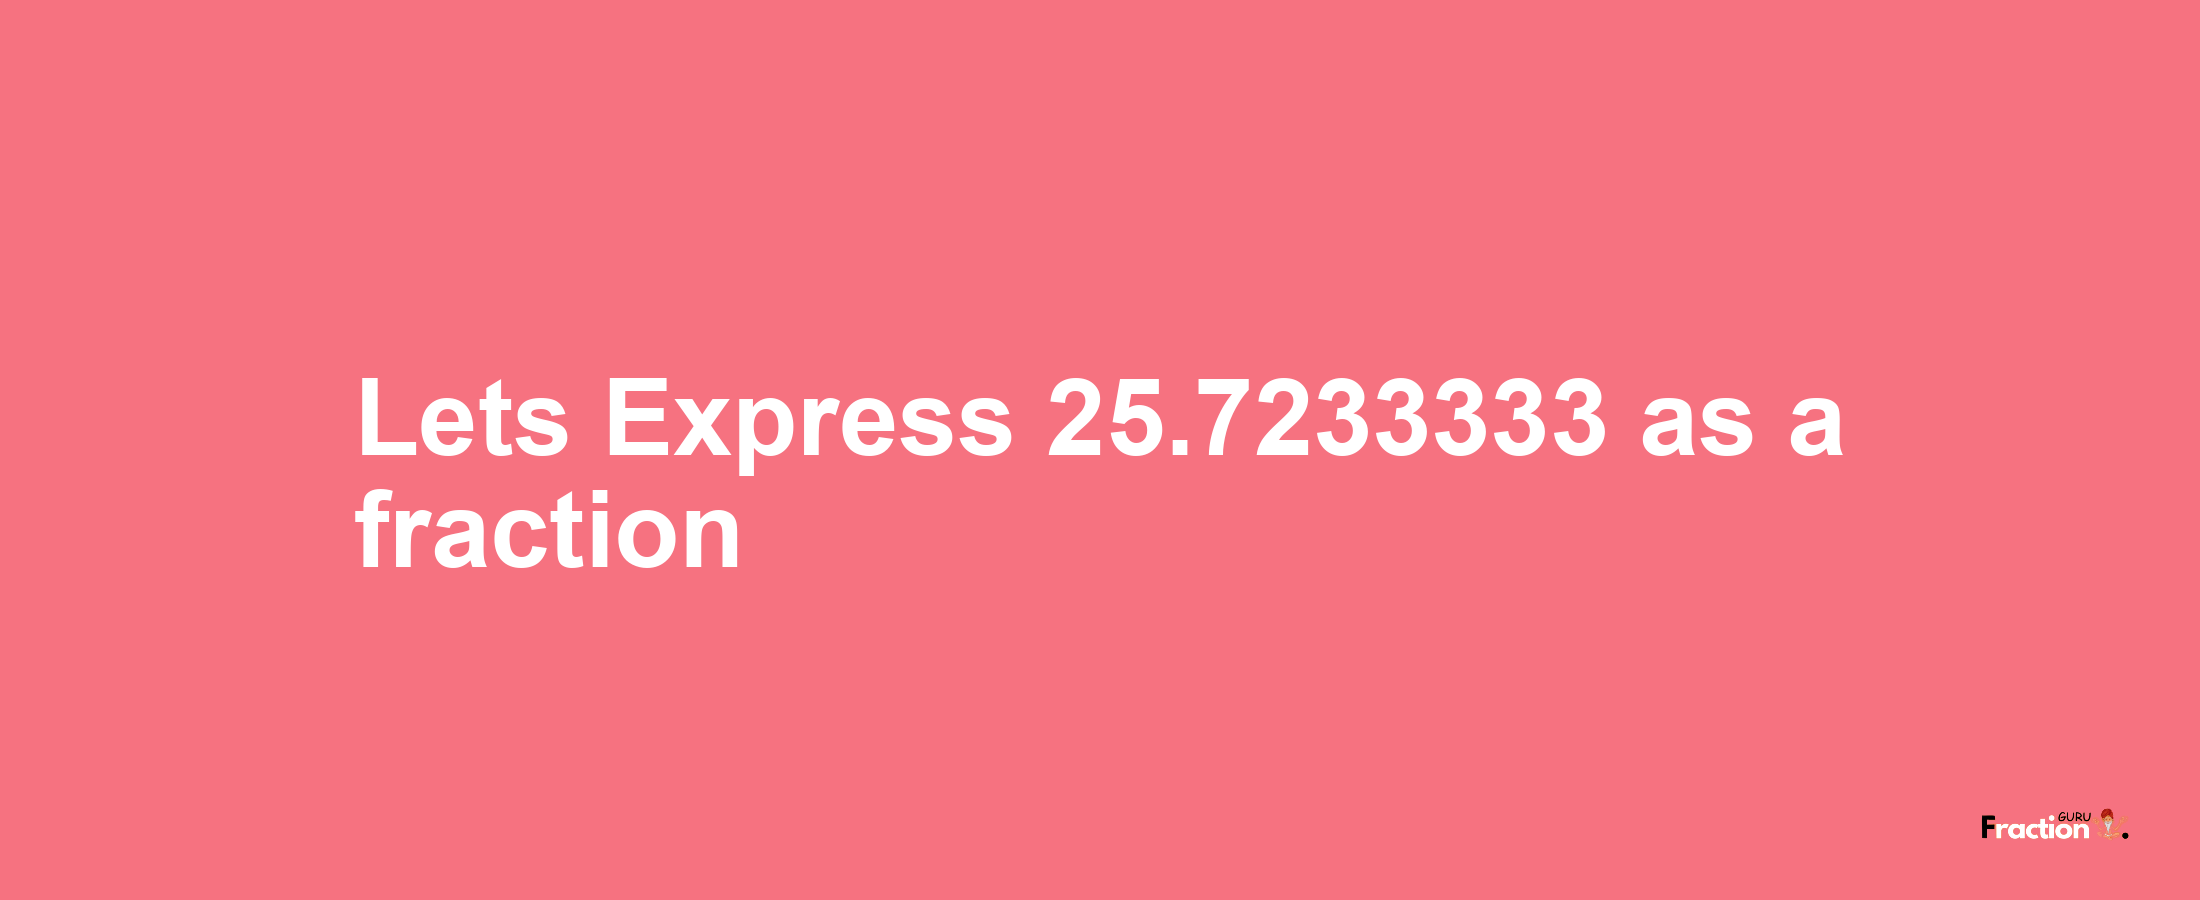 Lets Express 25.7233333 as afraction